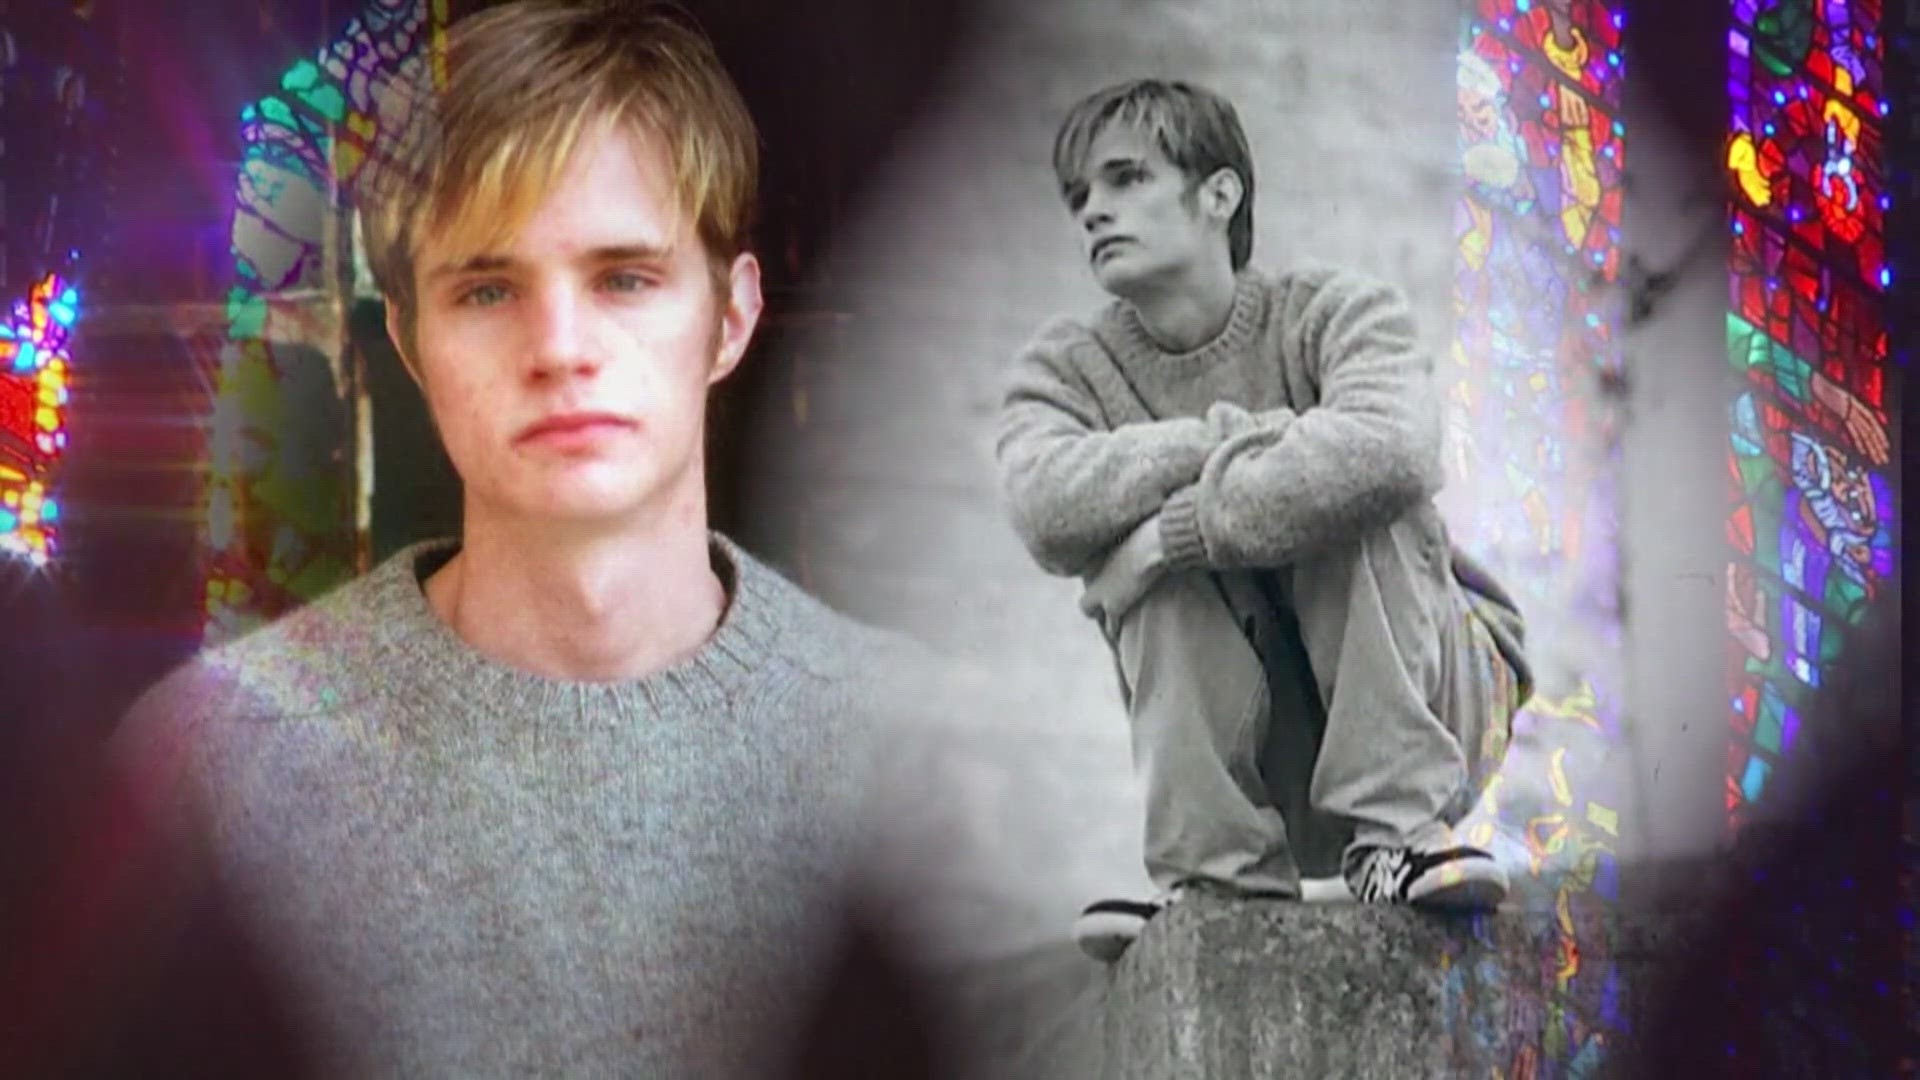 Judy Shepard co-founded the Matthew Shepard Foundation, named after her son, a gay University of Wyoming student who died after he was beaten and tied to a fence.